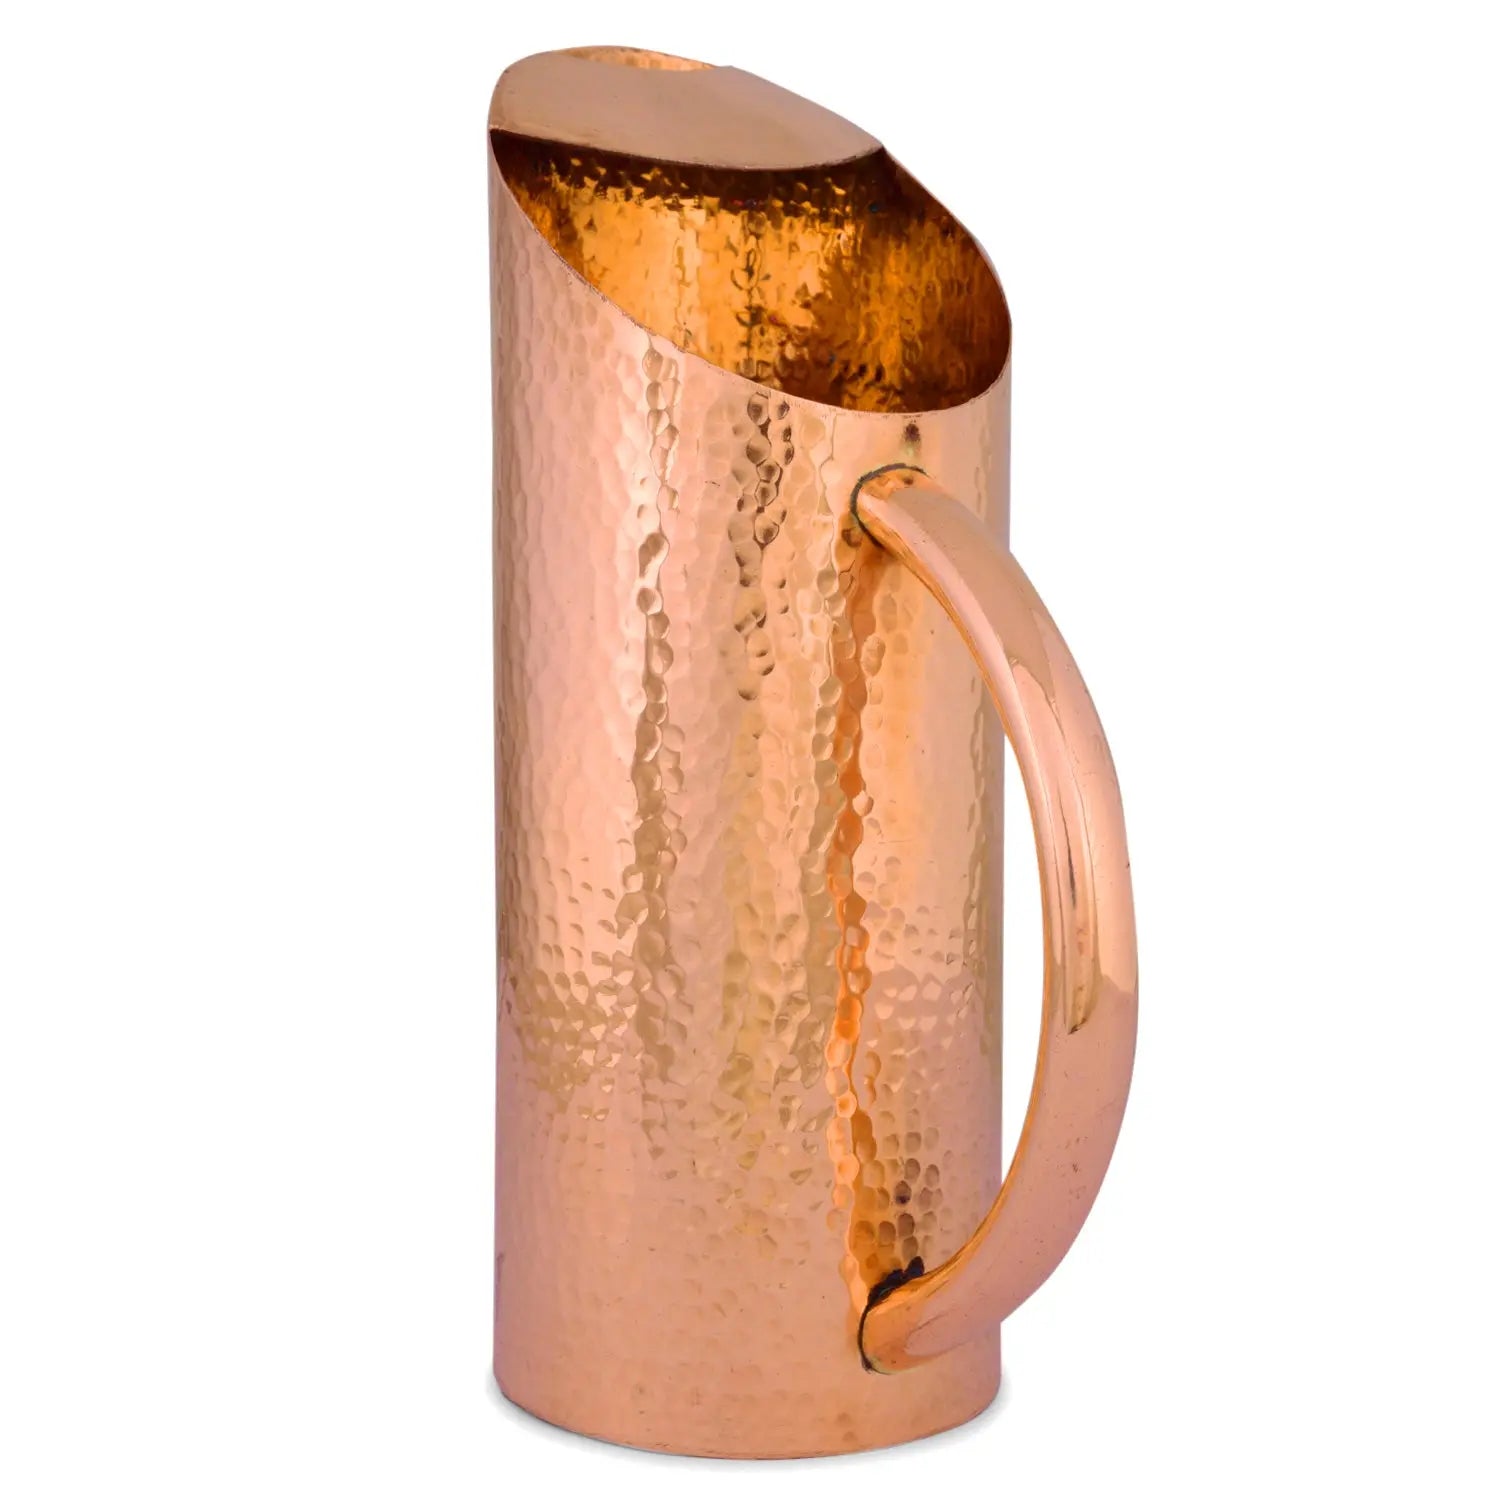 Pure Copper Hammered Jug For Serving In Hotels & Restaurants - CROCKERY WALA AND COMPANY 